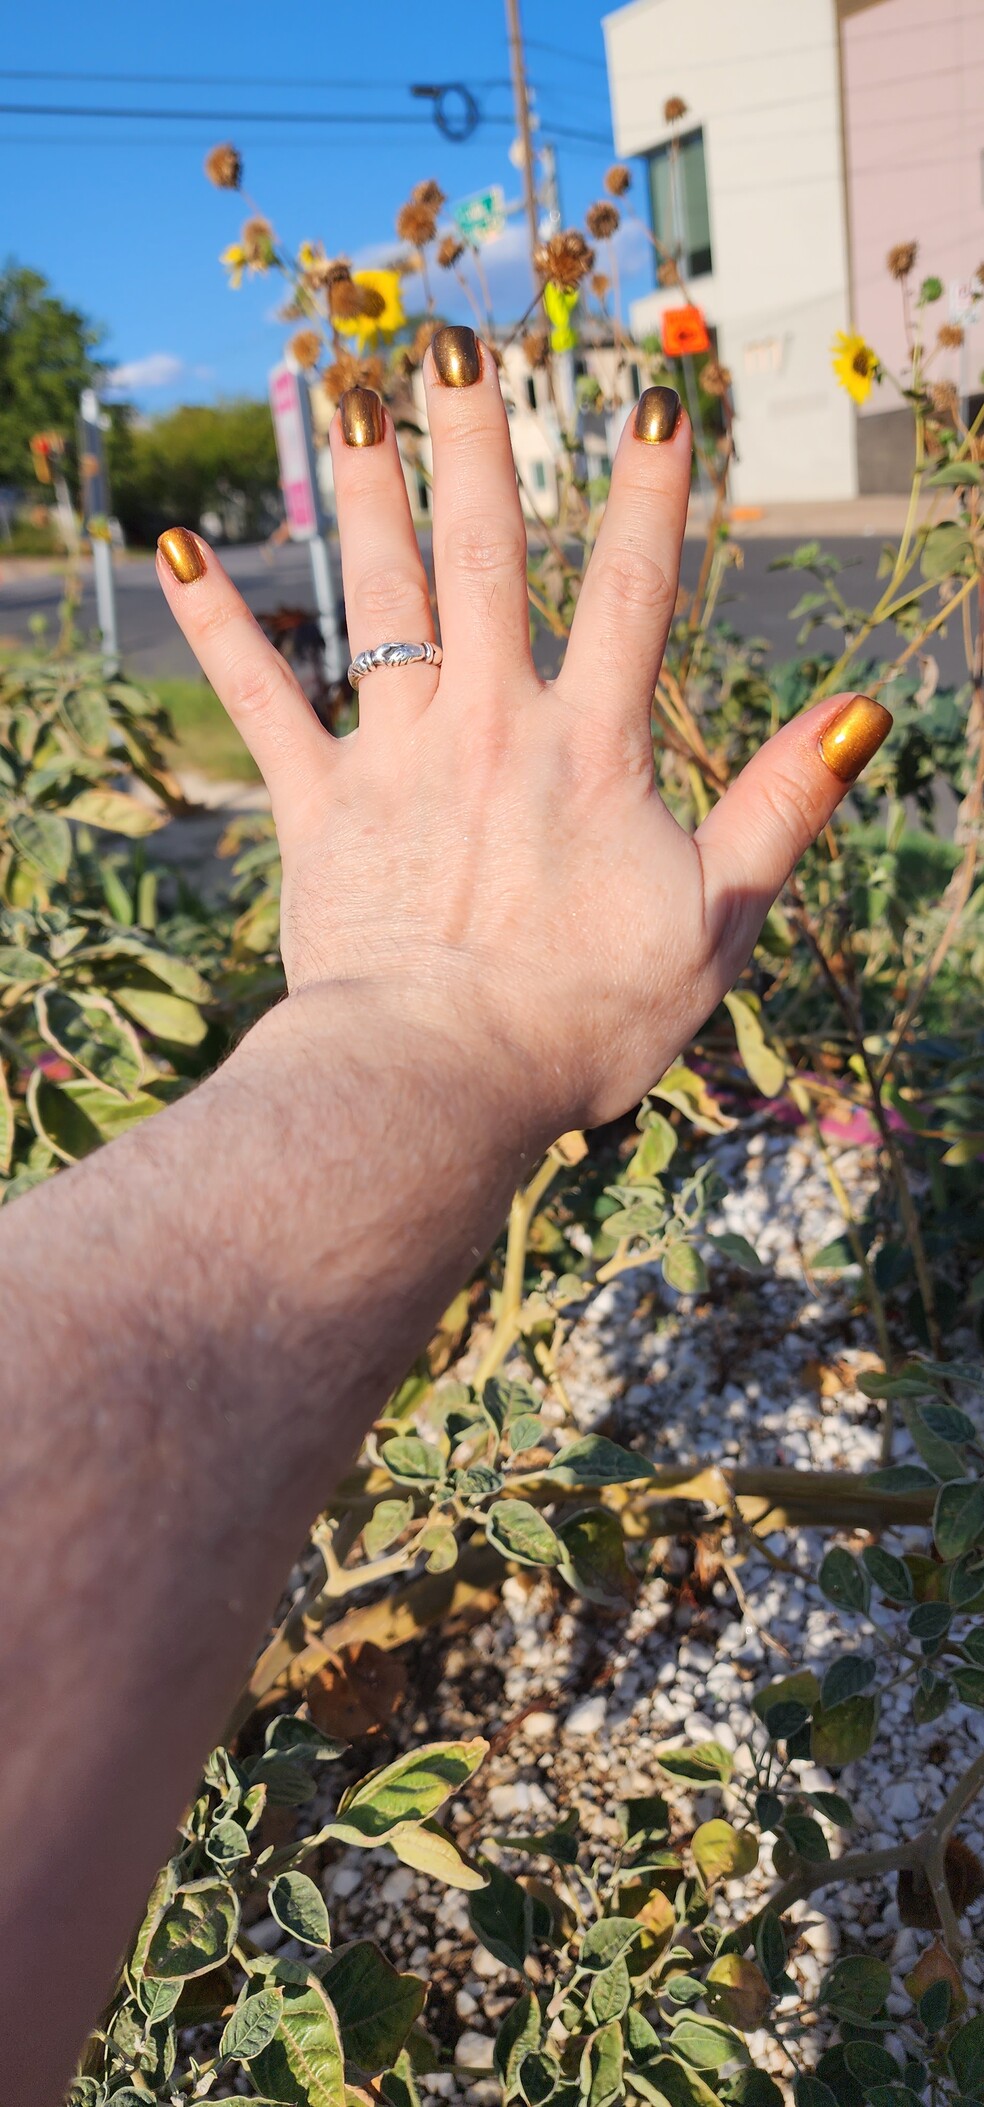 Kit's nails are a chrome orangey gold color. They are holding their hand up against a sunflower plant for a bacor5op. 